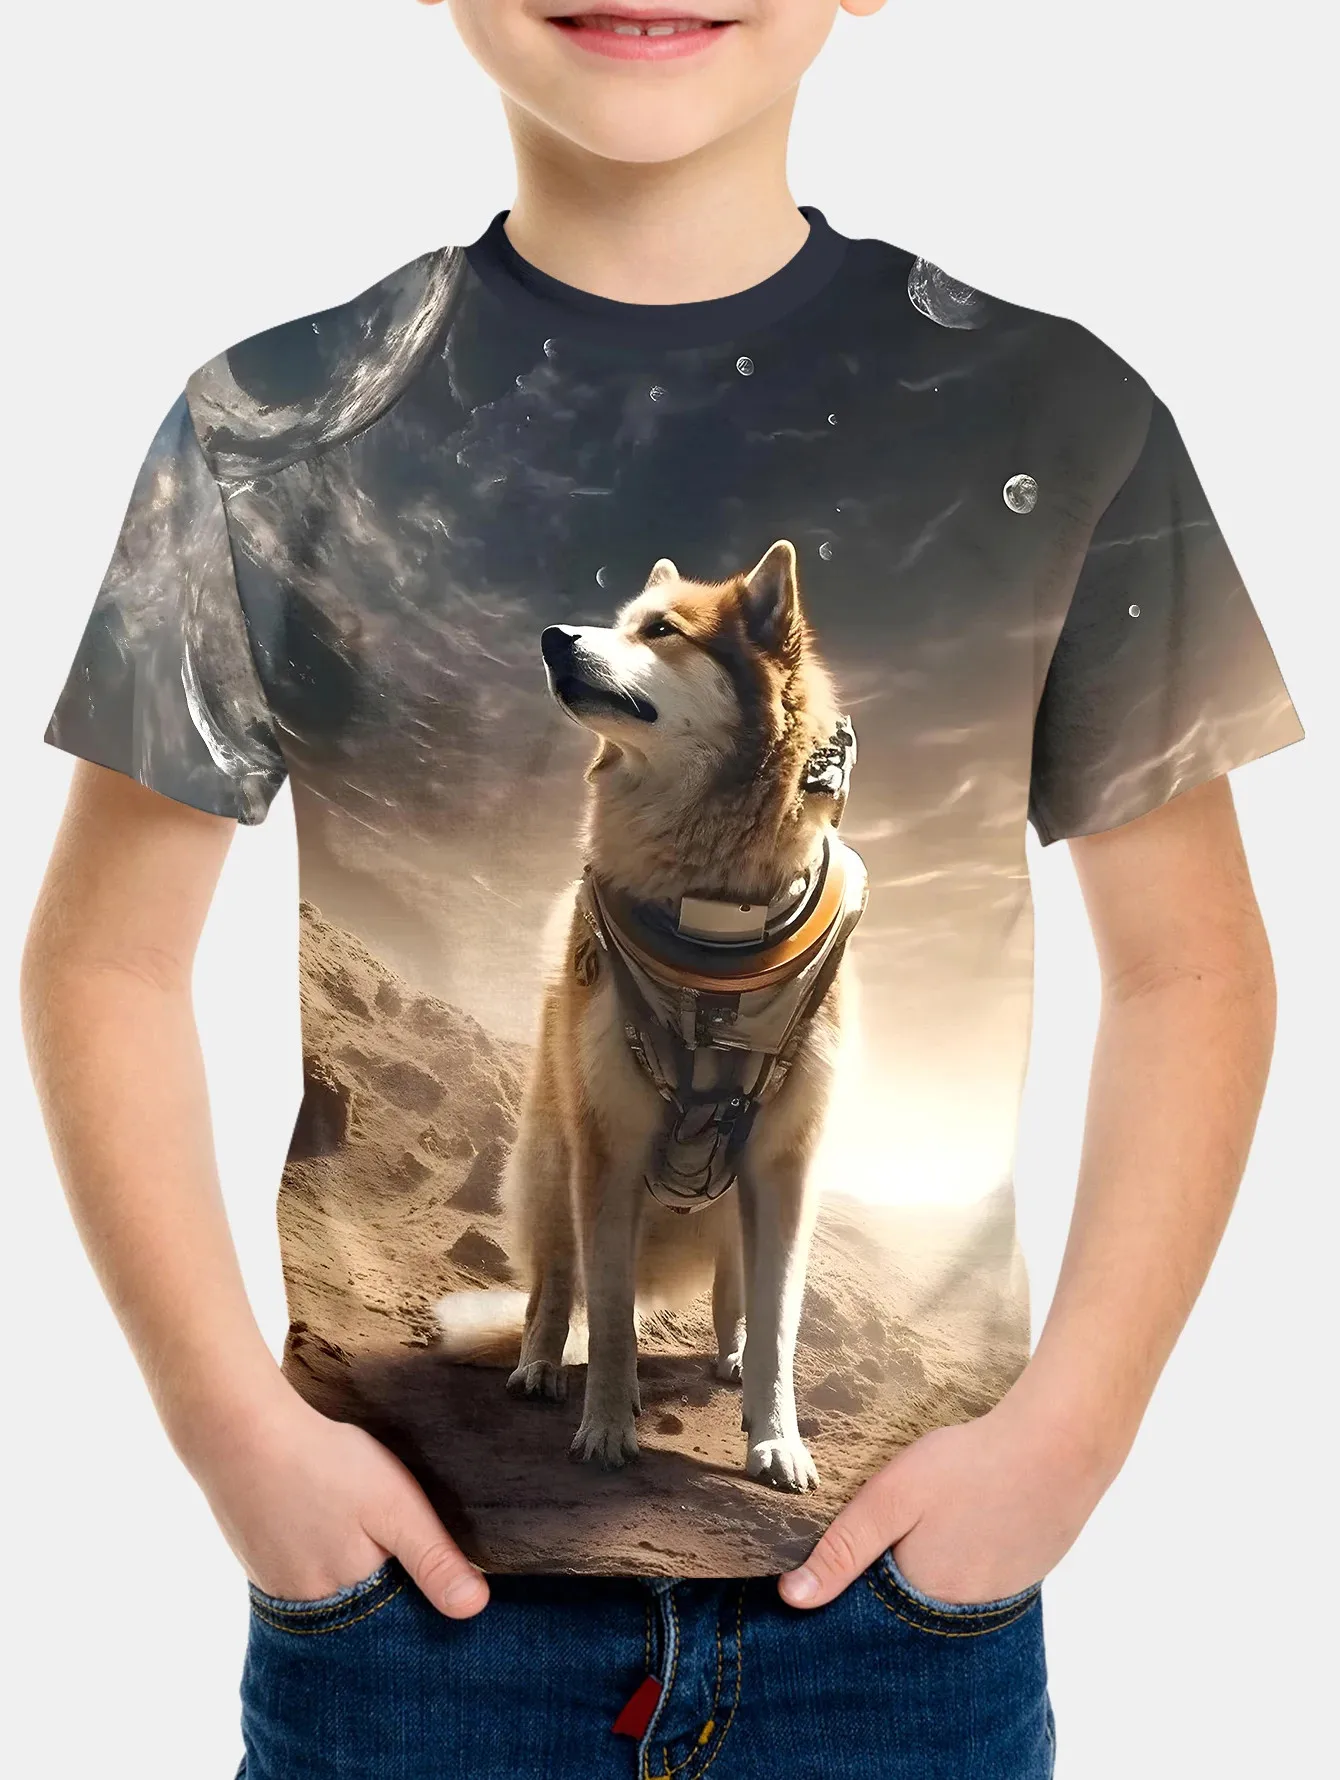 

Animal Wolf Pattern 3d Printe Children's Tops Summer Boy's Round Neck Casual Short Sleeve Comfortable Kids Clothes T Shirt